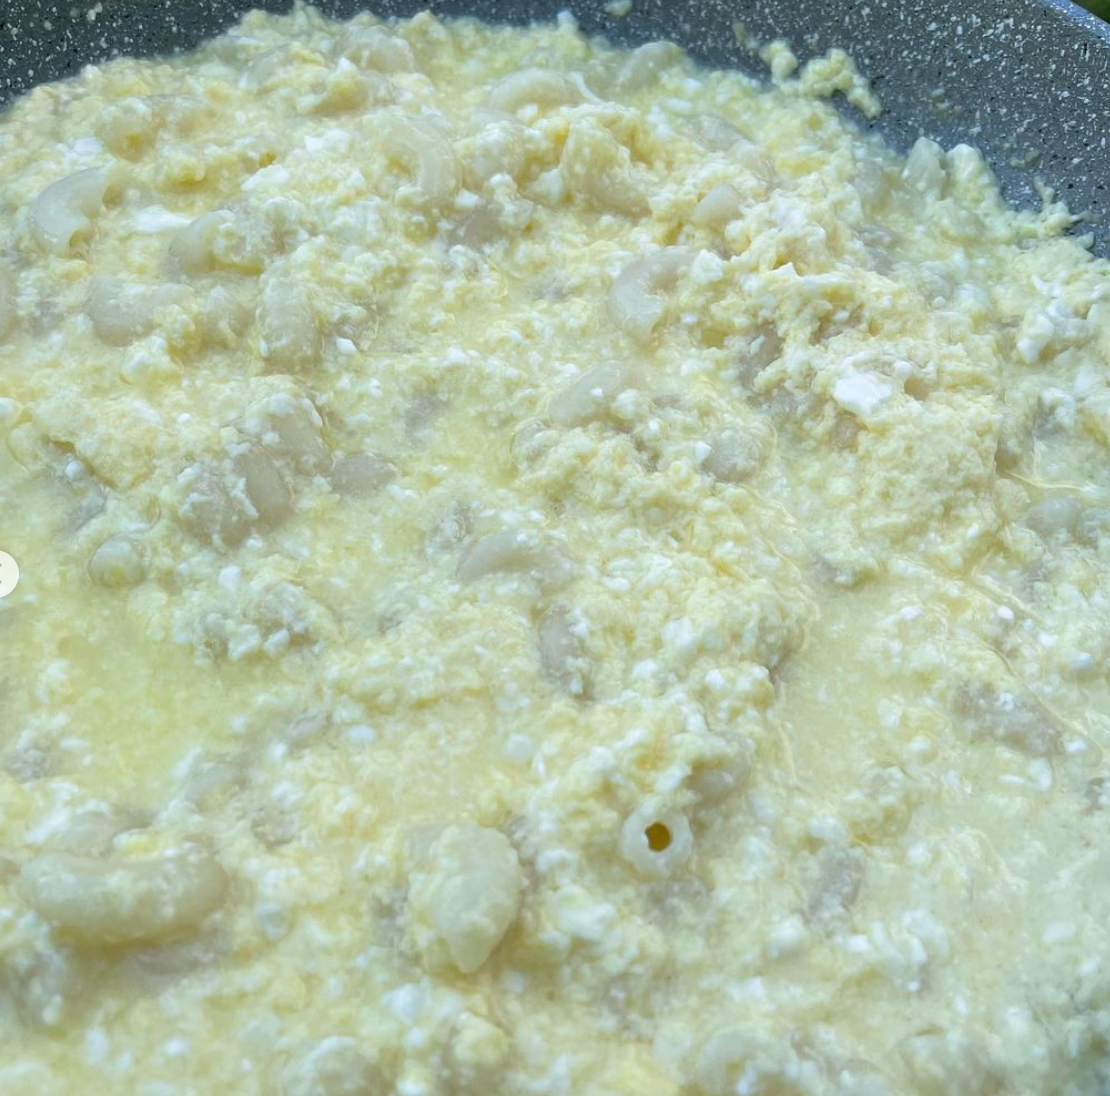 Mix cottage cheese, sour cream, and eggs.